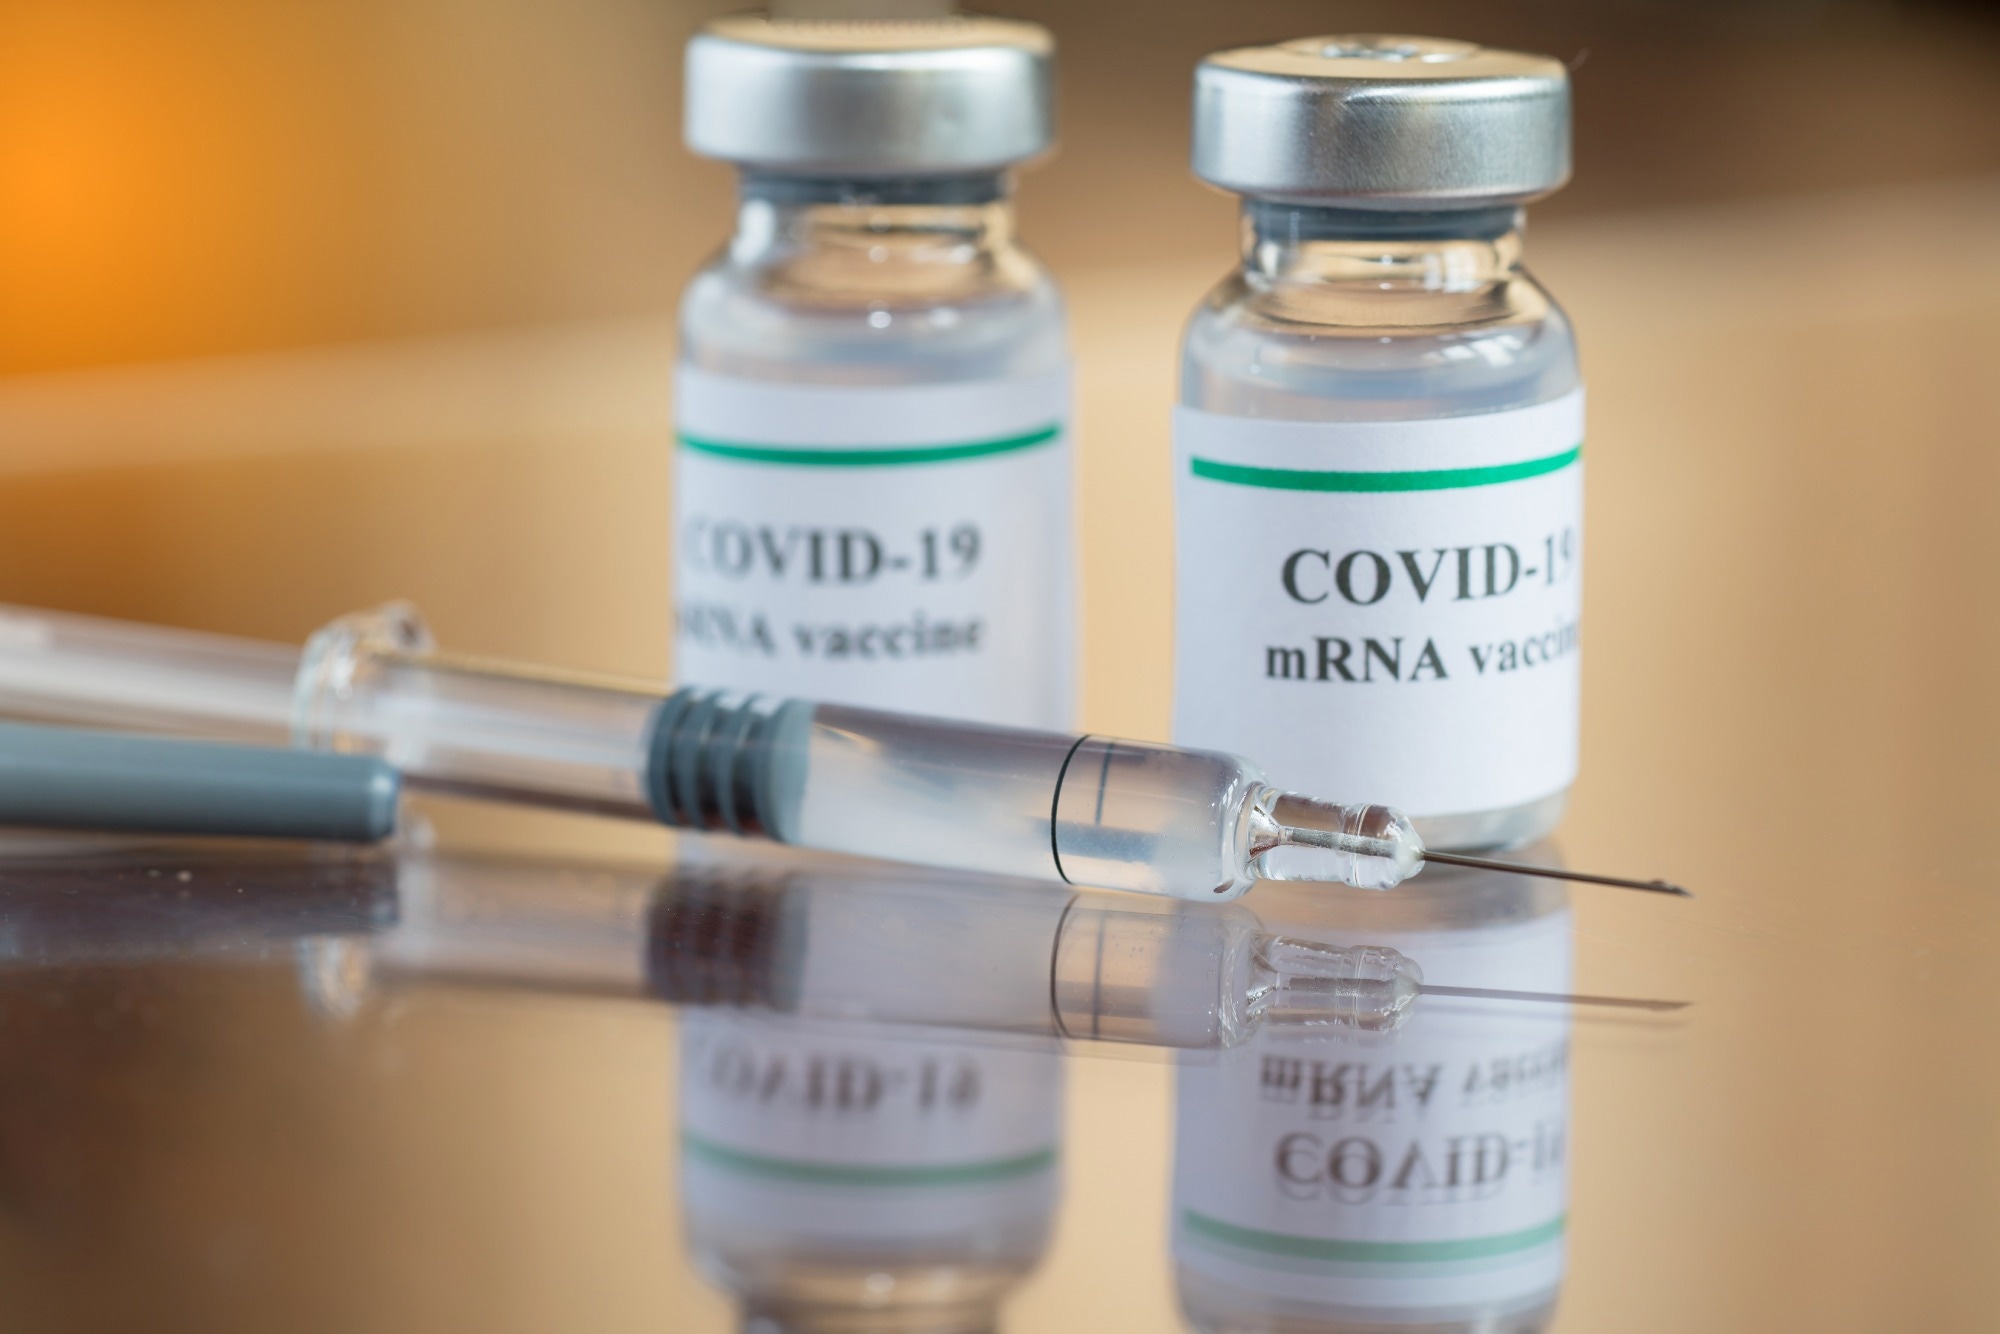 Study: BRIEF REPORT: Impact of age and SARS-CoV-2 breakthrough infection on humoral immune responses after three doses of COVID-19 mRNA vaccine. Image Credit: chatuphot/Shutterstock